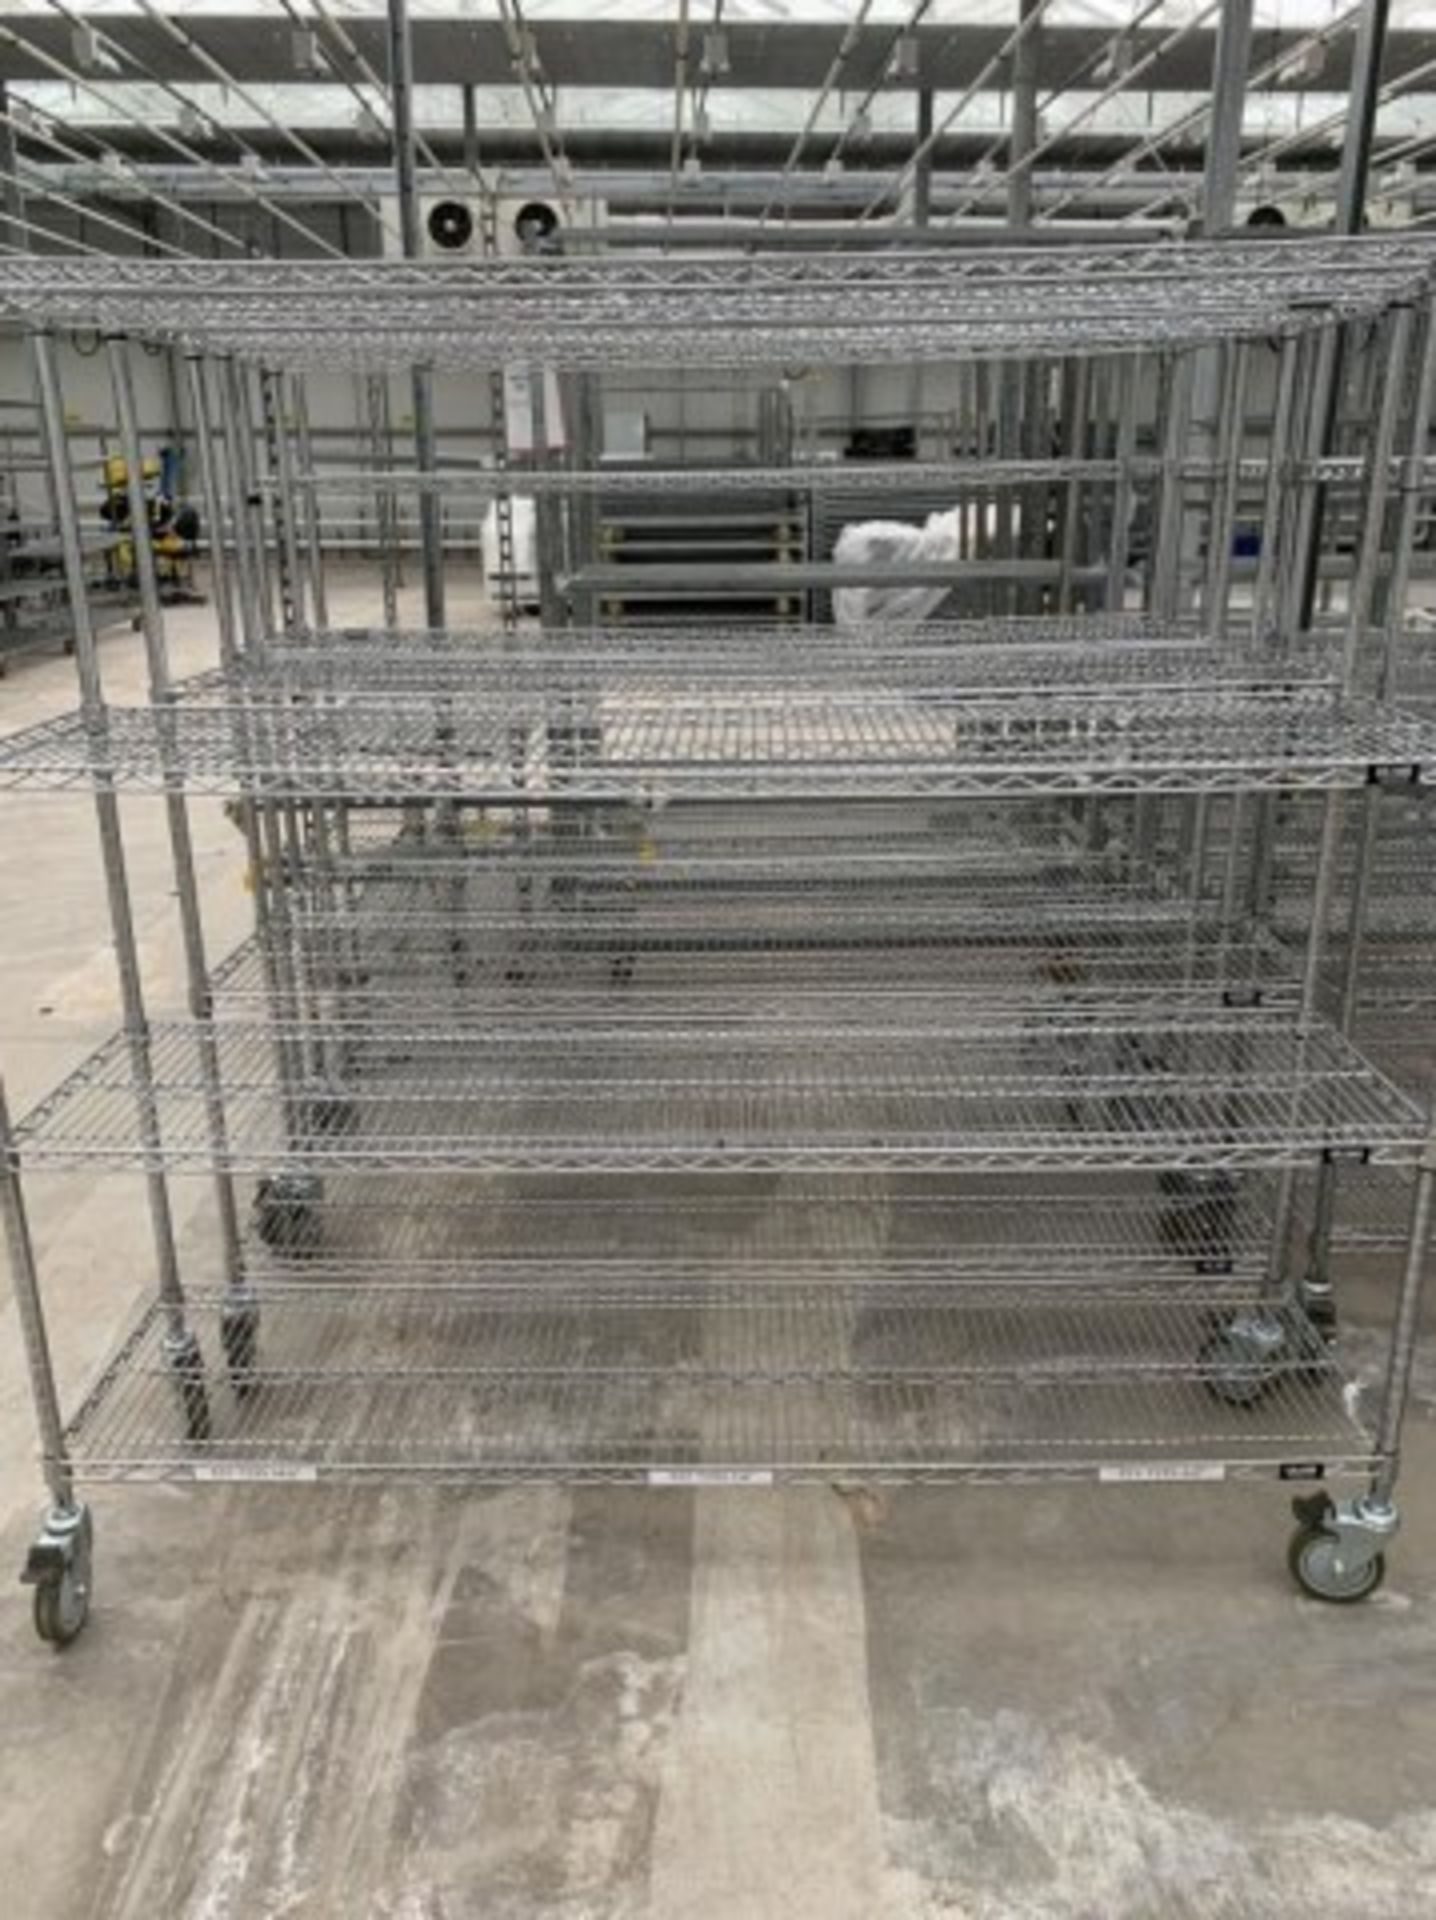 Rolling Carts with Shelves